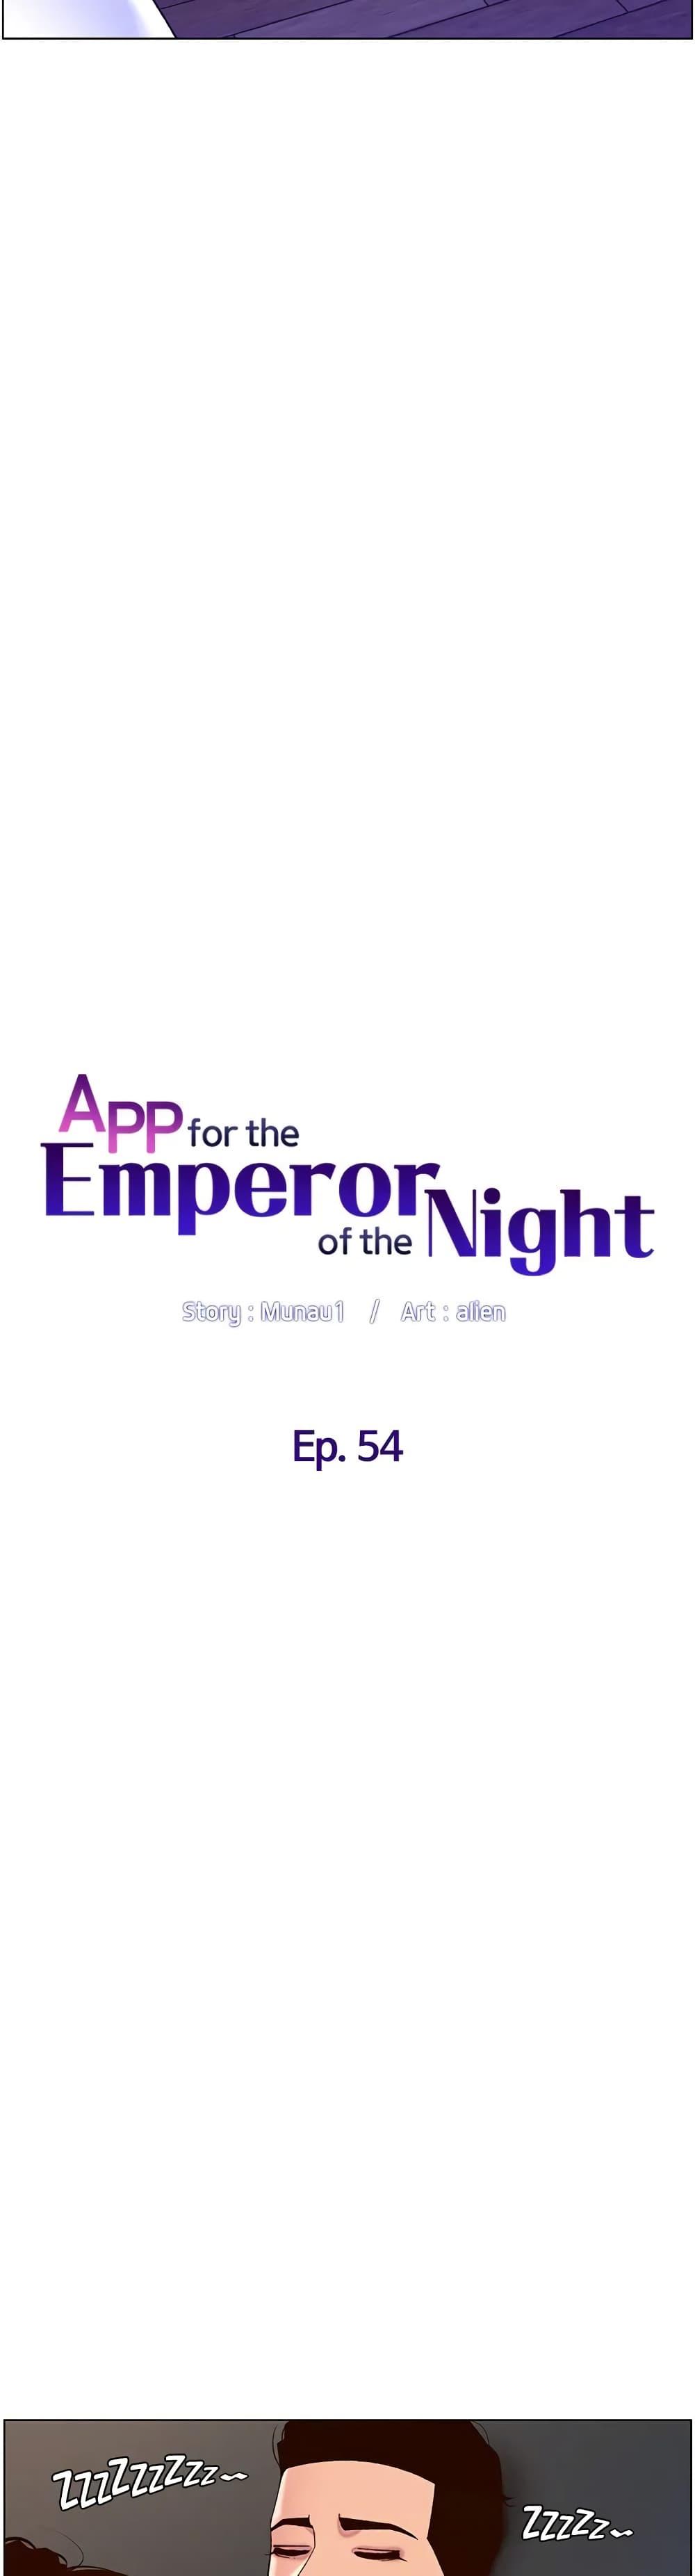 APP-for-the-Emperor-of-the-Night-0054-6.jpg